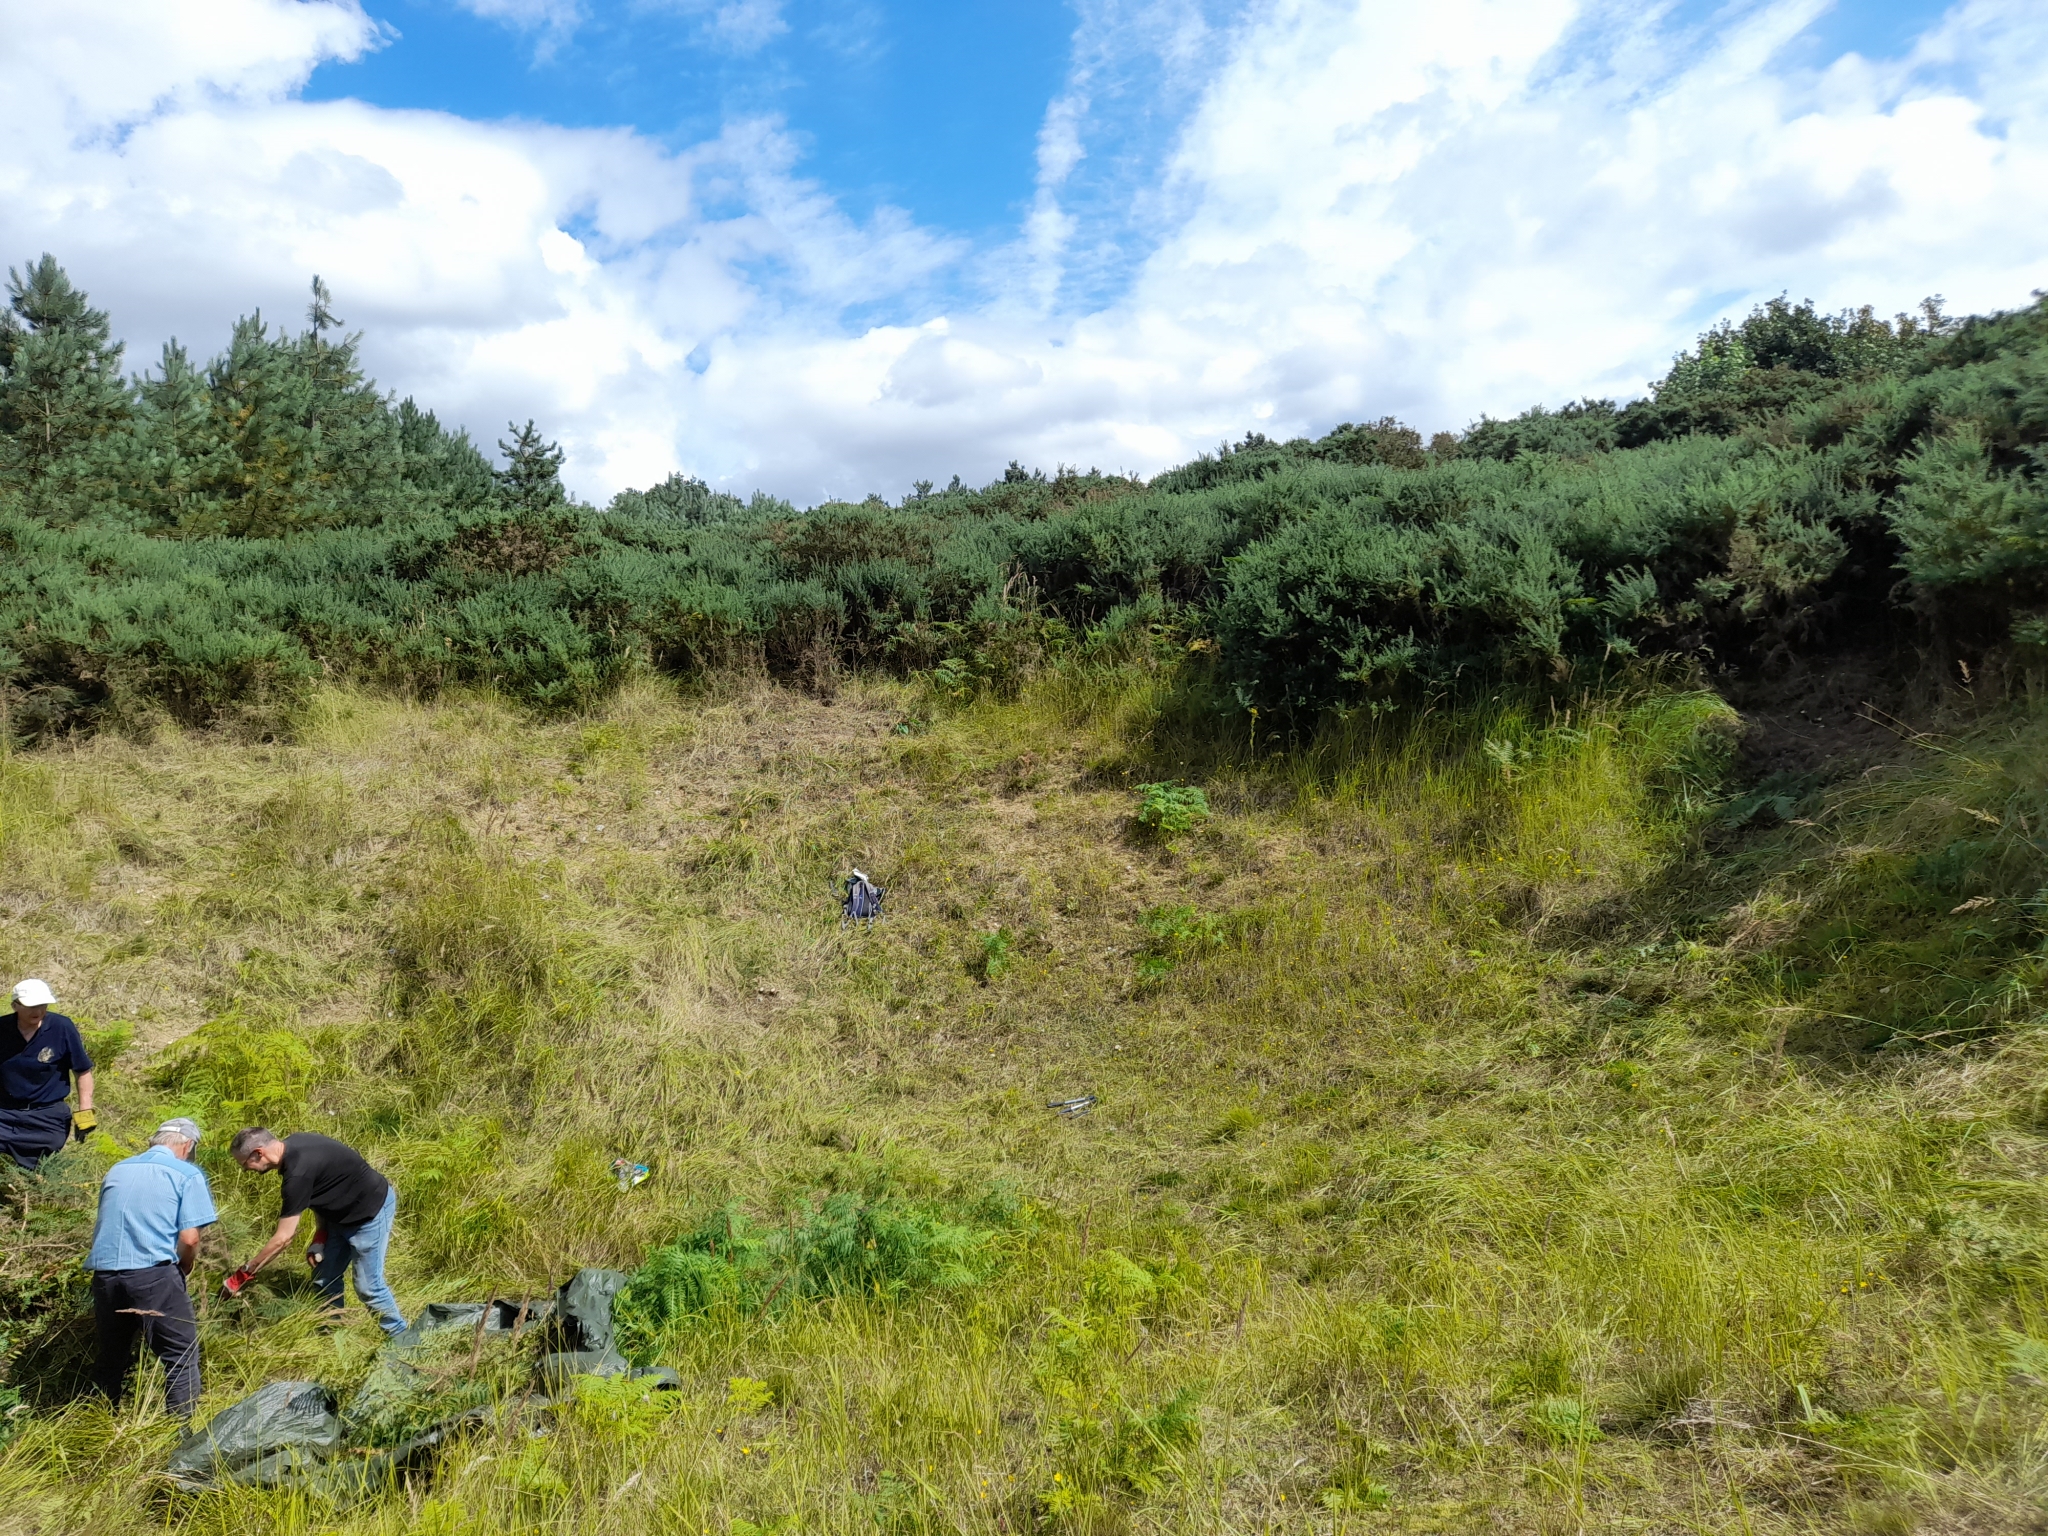 A photo from the FoTF Conservation Event - August 2021 - Maintenance tasks at Mildenhall Mugwort Pit & Mildenhall Warren Lodge : Volunteers tackle a clump of Gorse on the lower slopes of the Mugwort pit